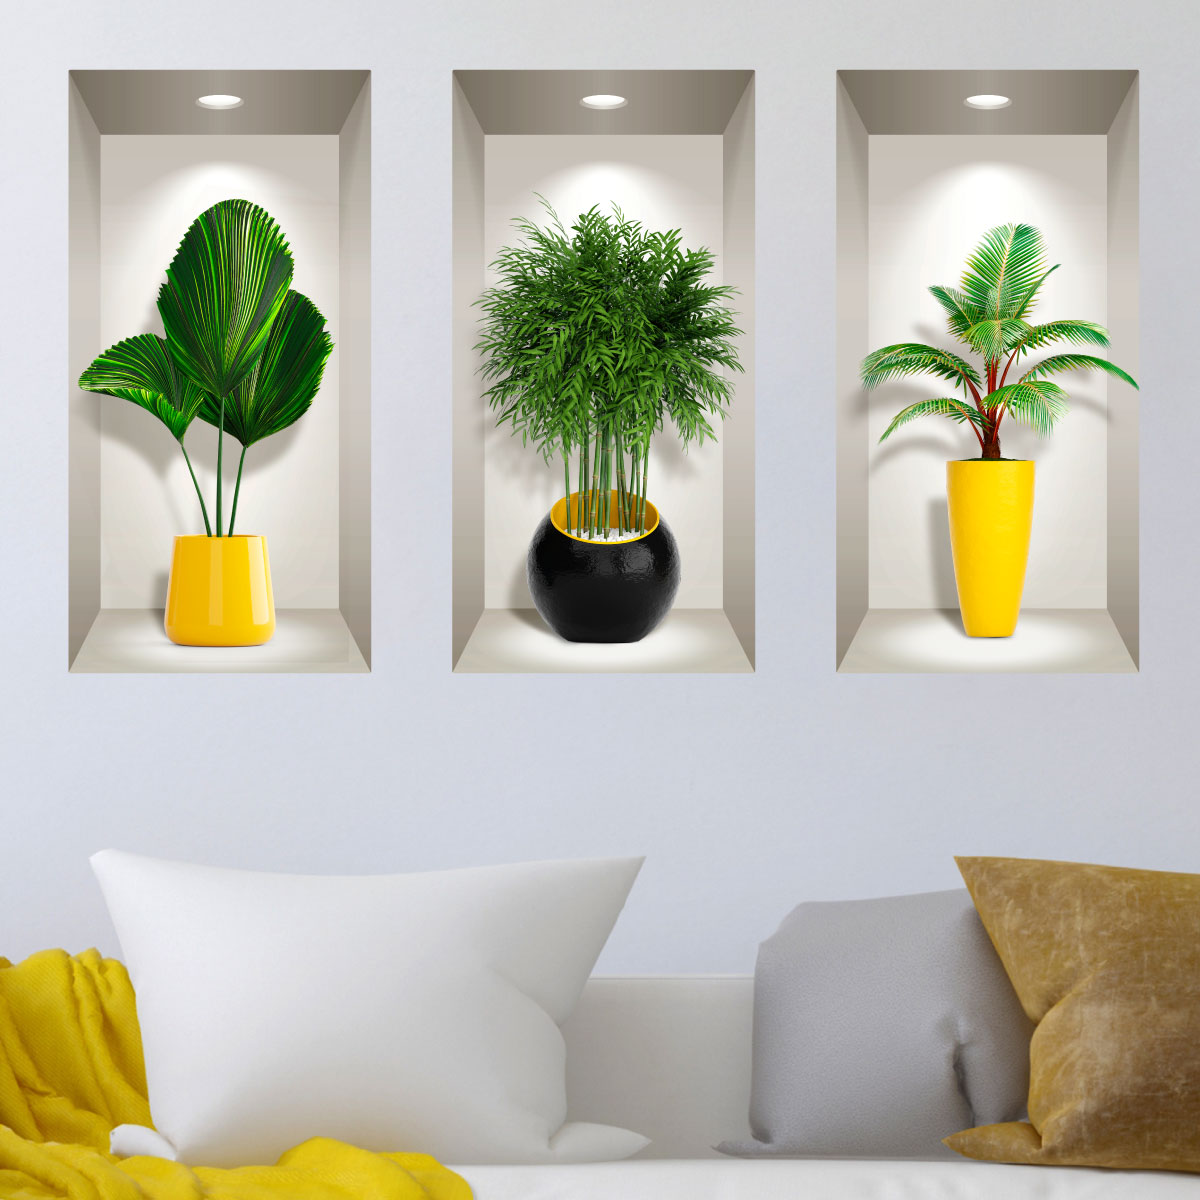 https://www.ambiance-sticker.com/images/Image/stickers-3d-plantes-tropicales-ambiance-sticker-col-3d-ROS-C477.jpg